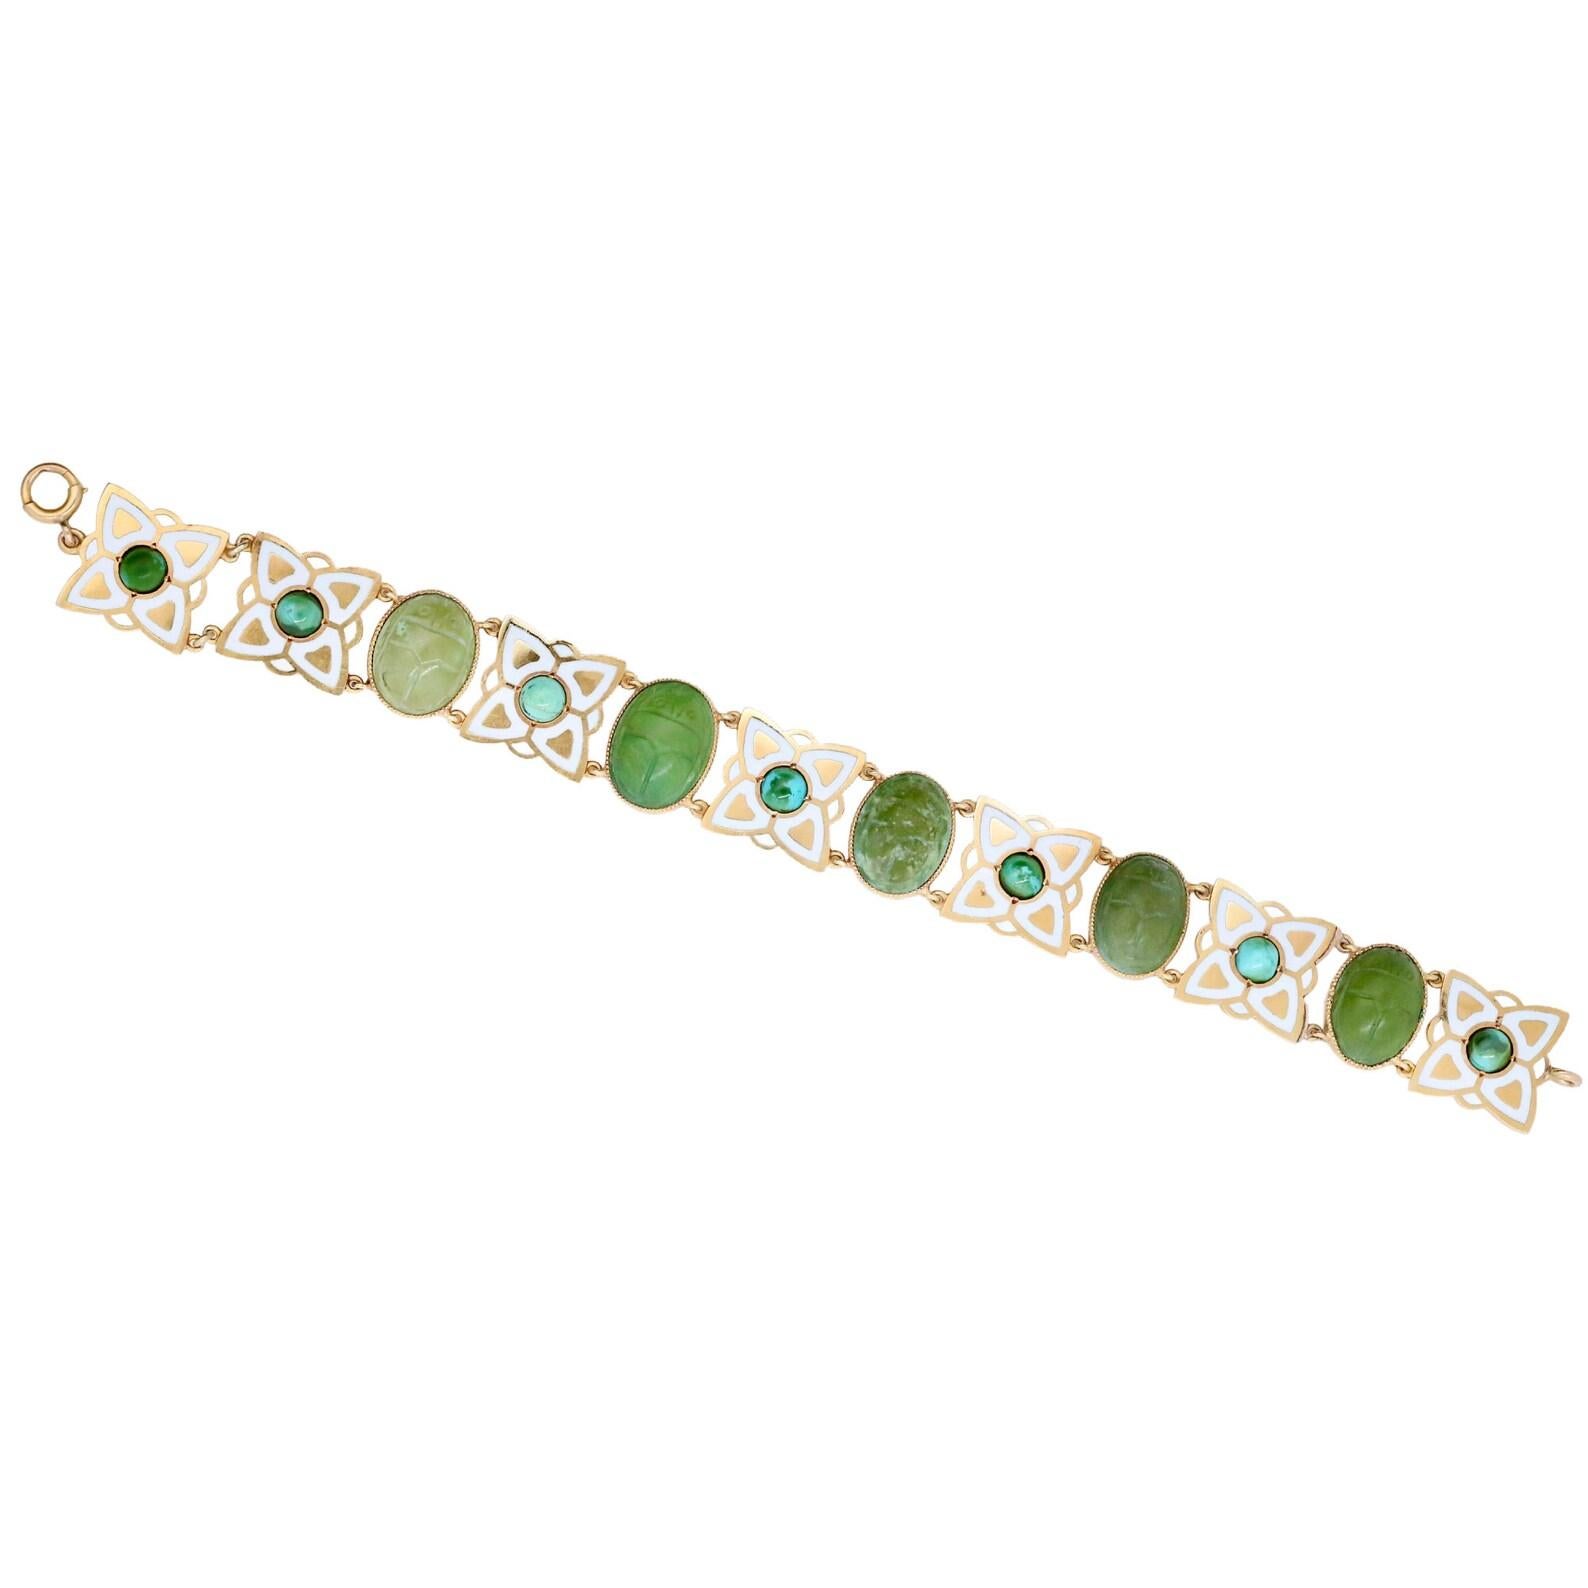 An art nouveau period enameled floral motif bracelet set with ancient scarabs, and cabochons of turquoise. This bracelet features five bezel set green stone ancient scarab jewels. Alternating with the scarabs are beautifully enameled floral motif